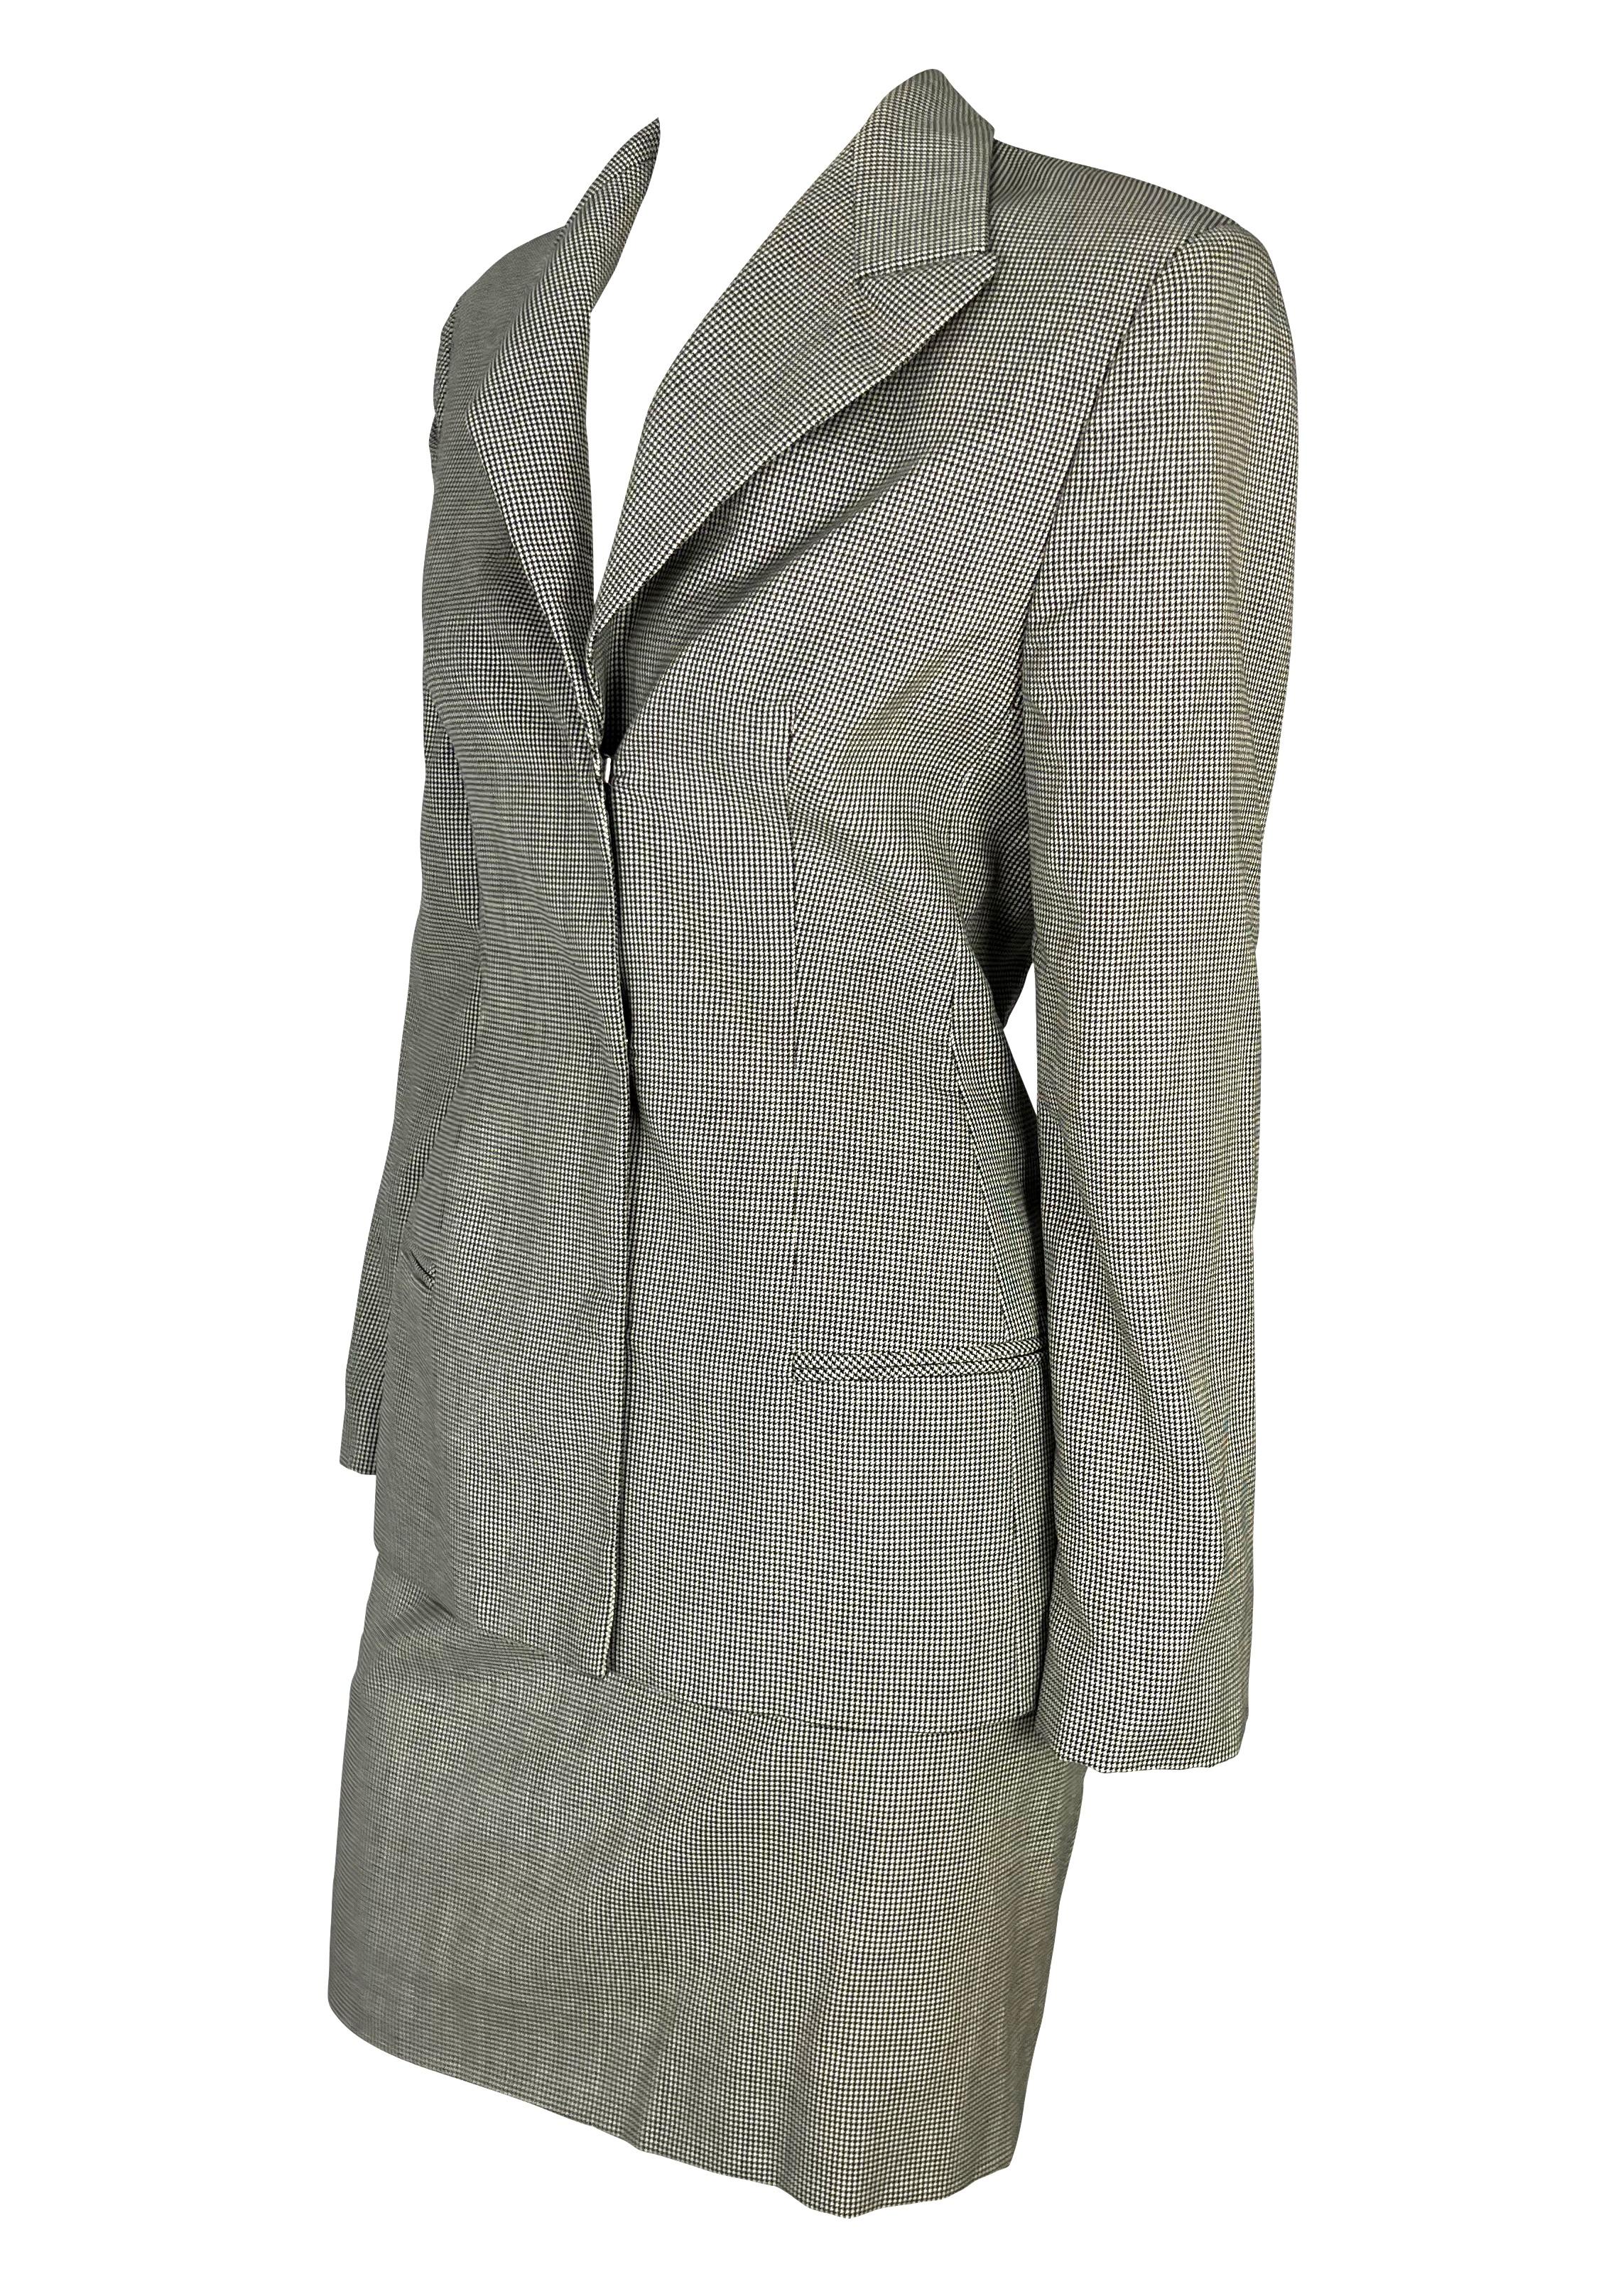 Presenting a grey houndstooth Gianni Versace skirt suit, designed by Donatella Versace. From the Fall/Winter 1998 collection, this fabulous skirt suit features hidden hook closures on the blazer, a draped detail at the back of the blazer, and a